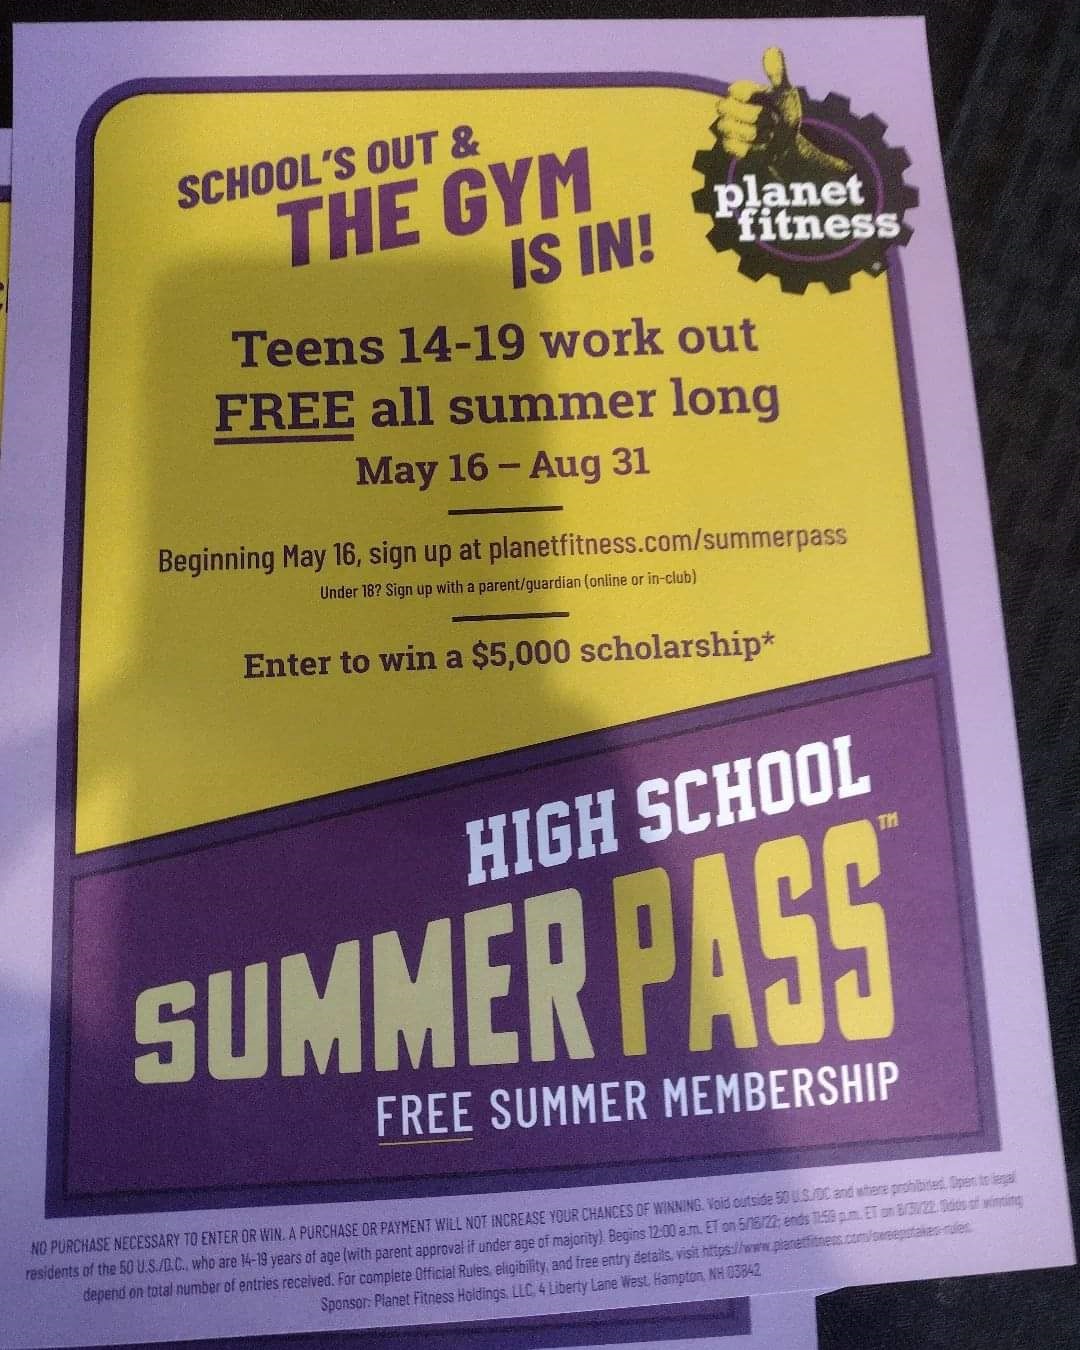 PLANET FITNESS INVITES TEENS TO WORK OUT FOR FREE ALL SUMMER LONG